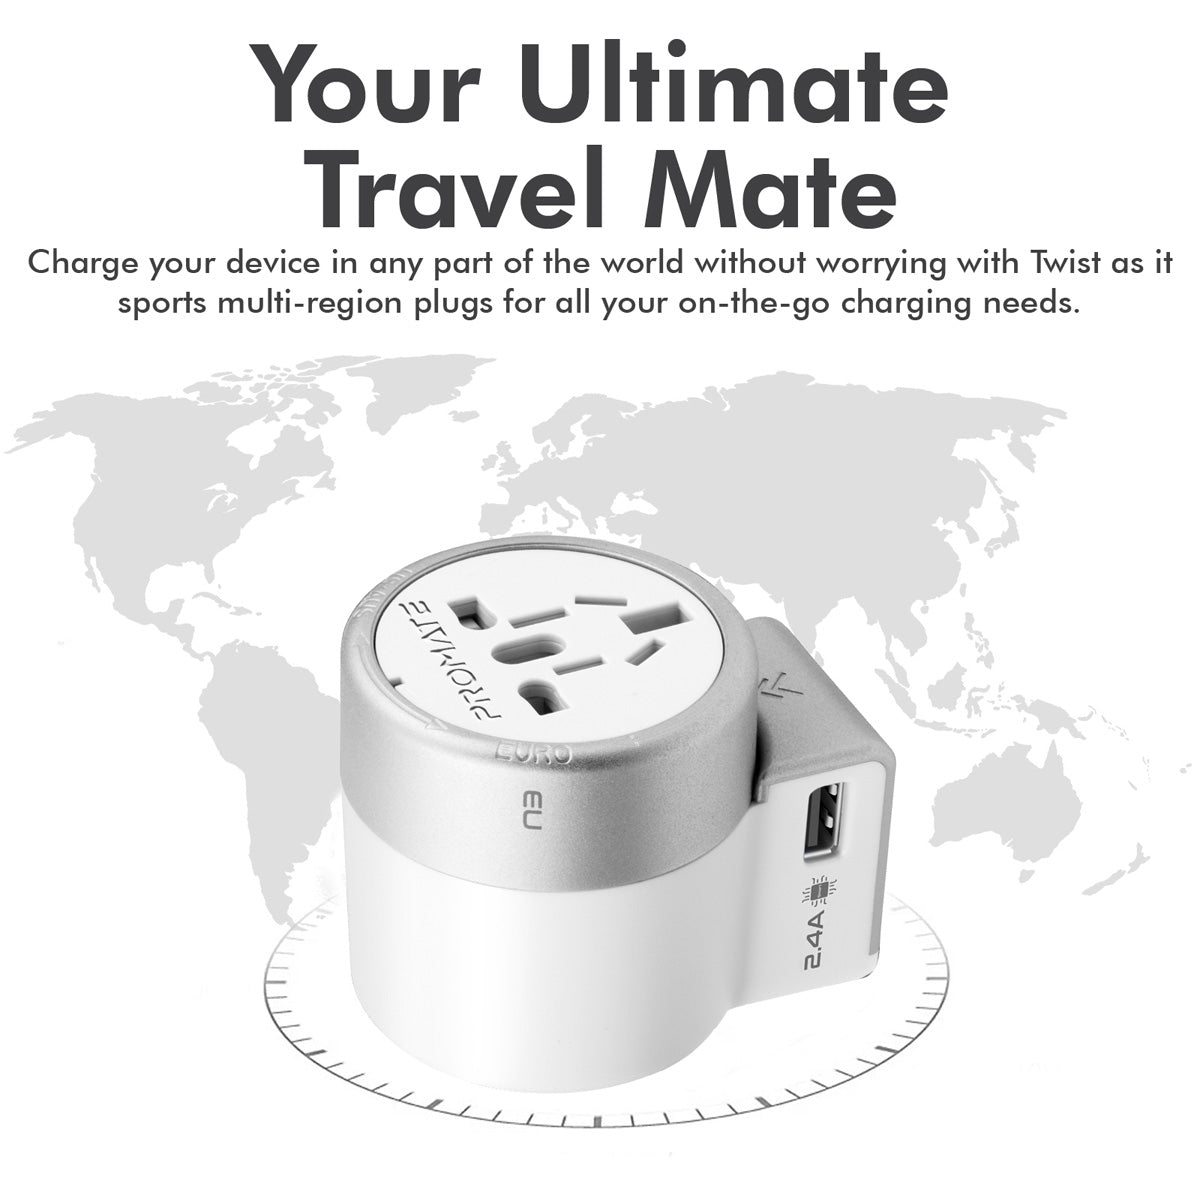 Promate - Universal Travel Adapter, All-In-One International Twist Design Power Adapter with 2.4A 12W Dual USB Charging Port and Worldwide AC Wall Outlet Adapter for UK, EU, AU, US, Smartphones, Laptops, Tablets, Twist White